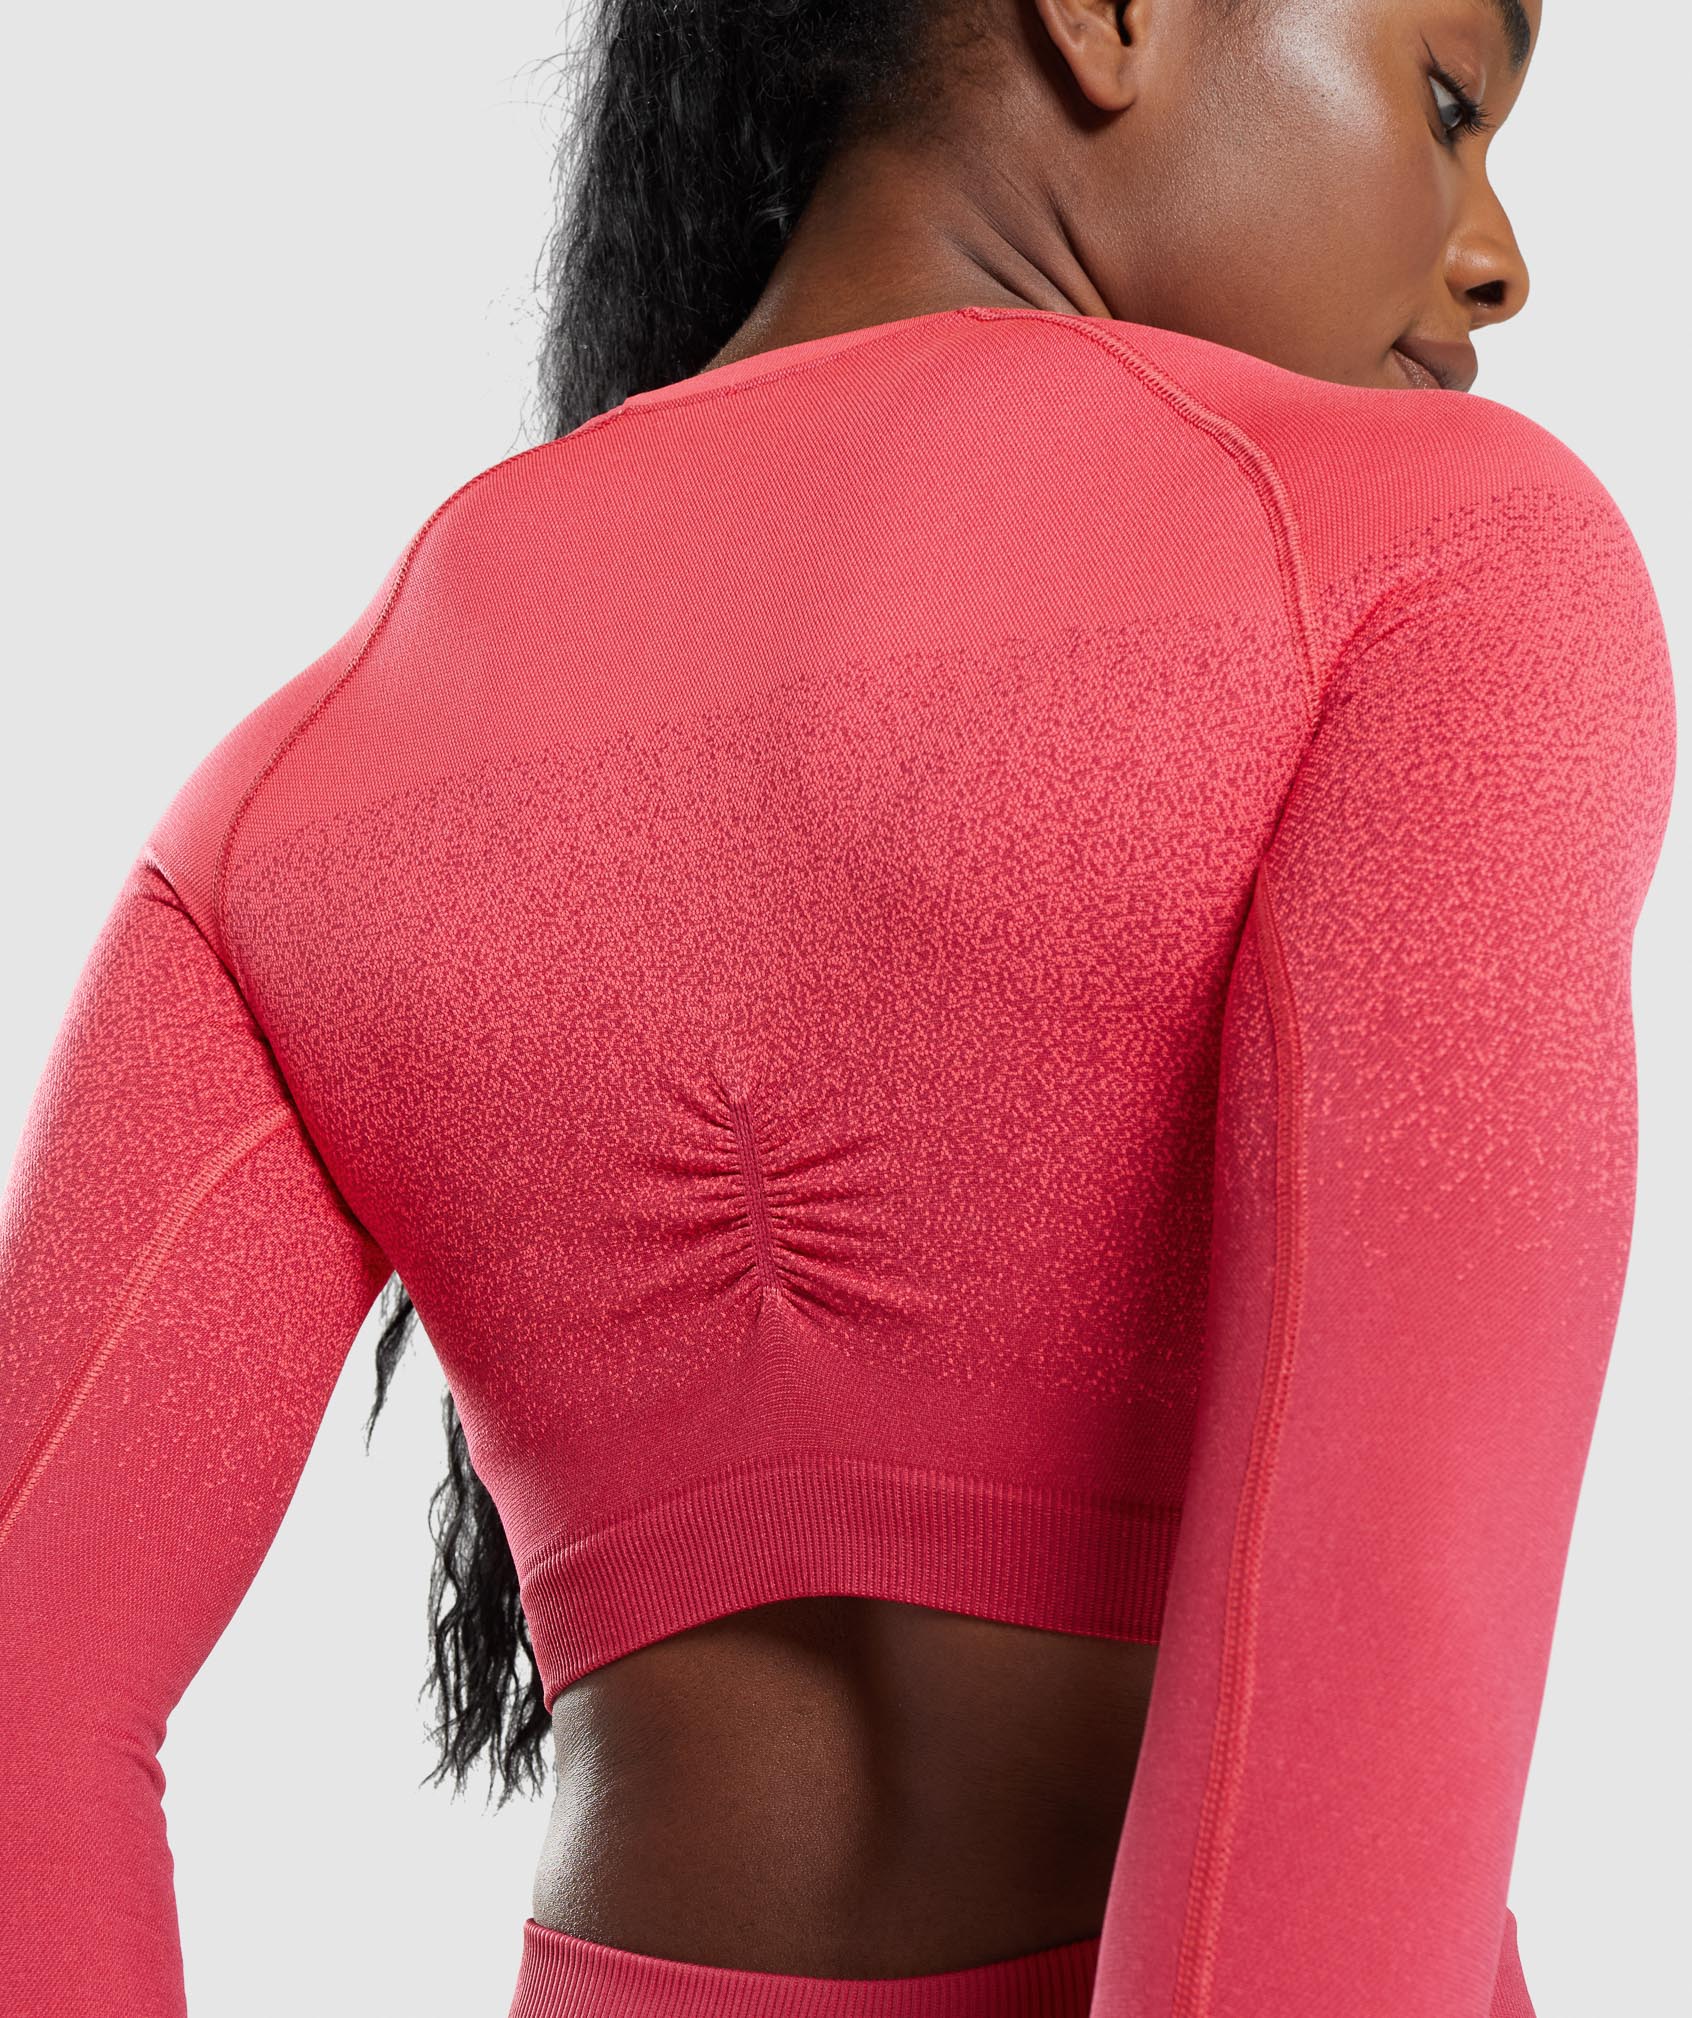 Adapt Ombre Seamless Long Sleeve Crop Top in Pink/Red - view 6